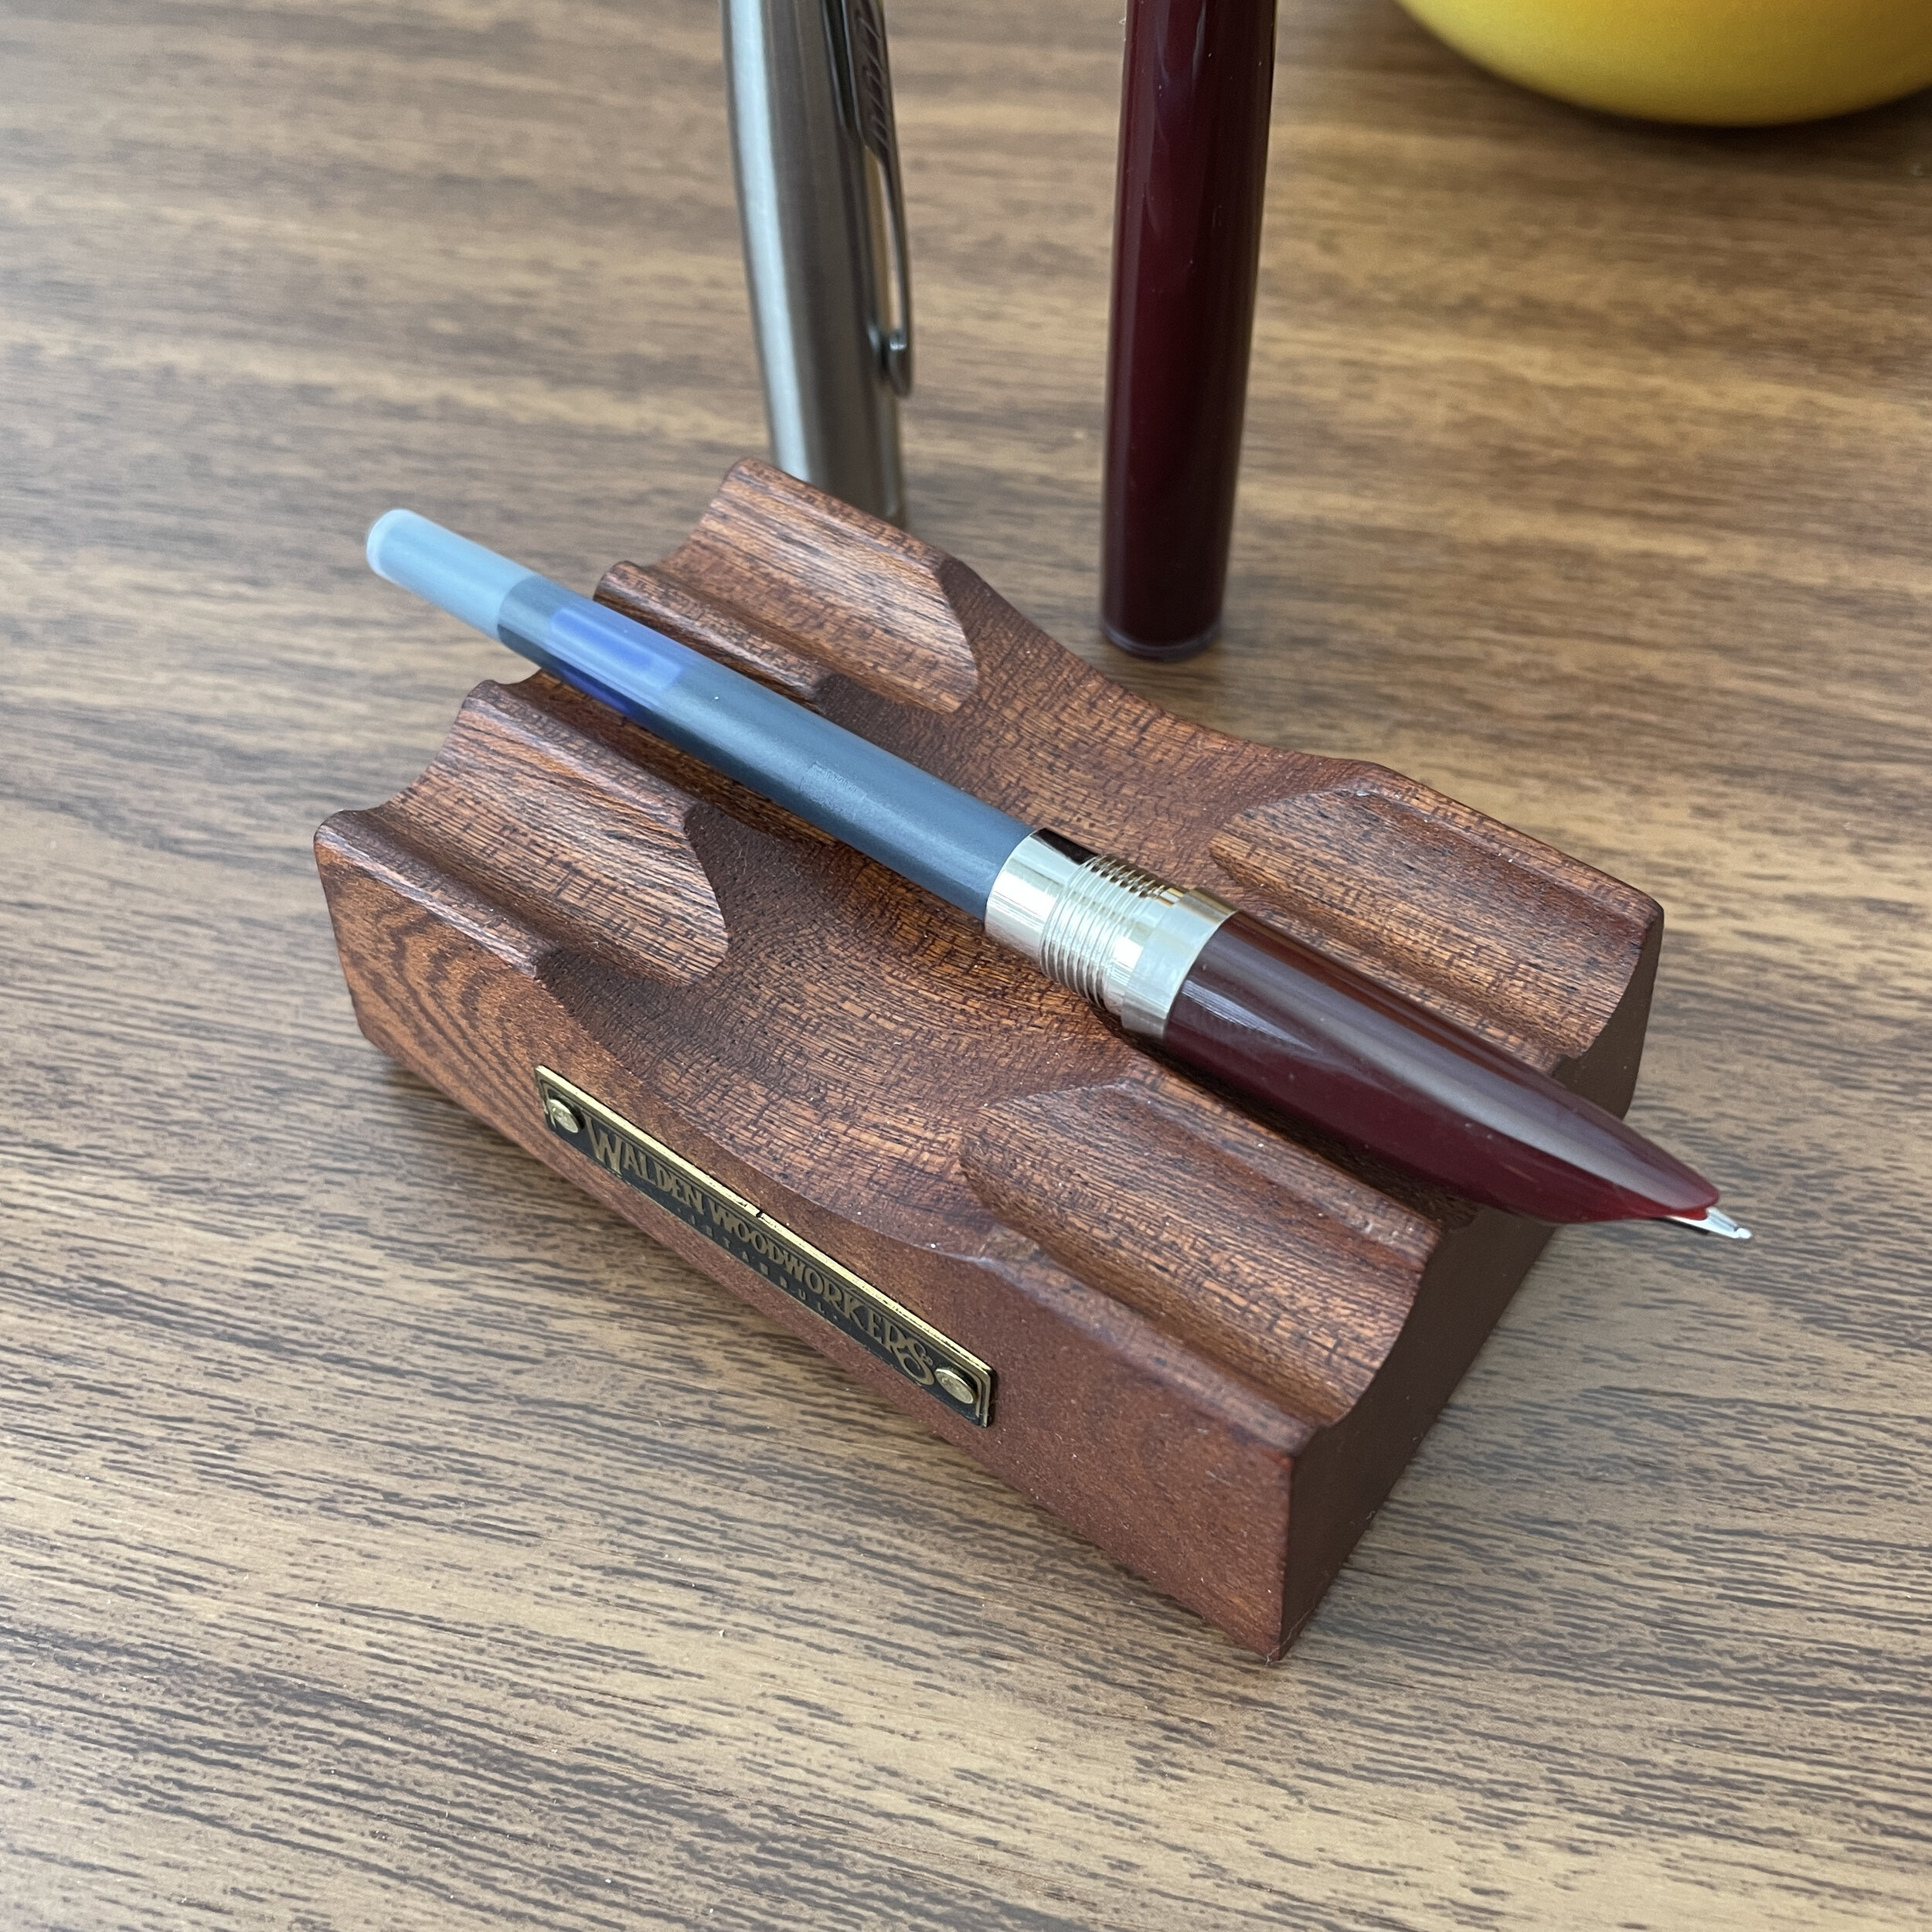 First Impressions: Hands On with the New Parker 51 Fountain Pen